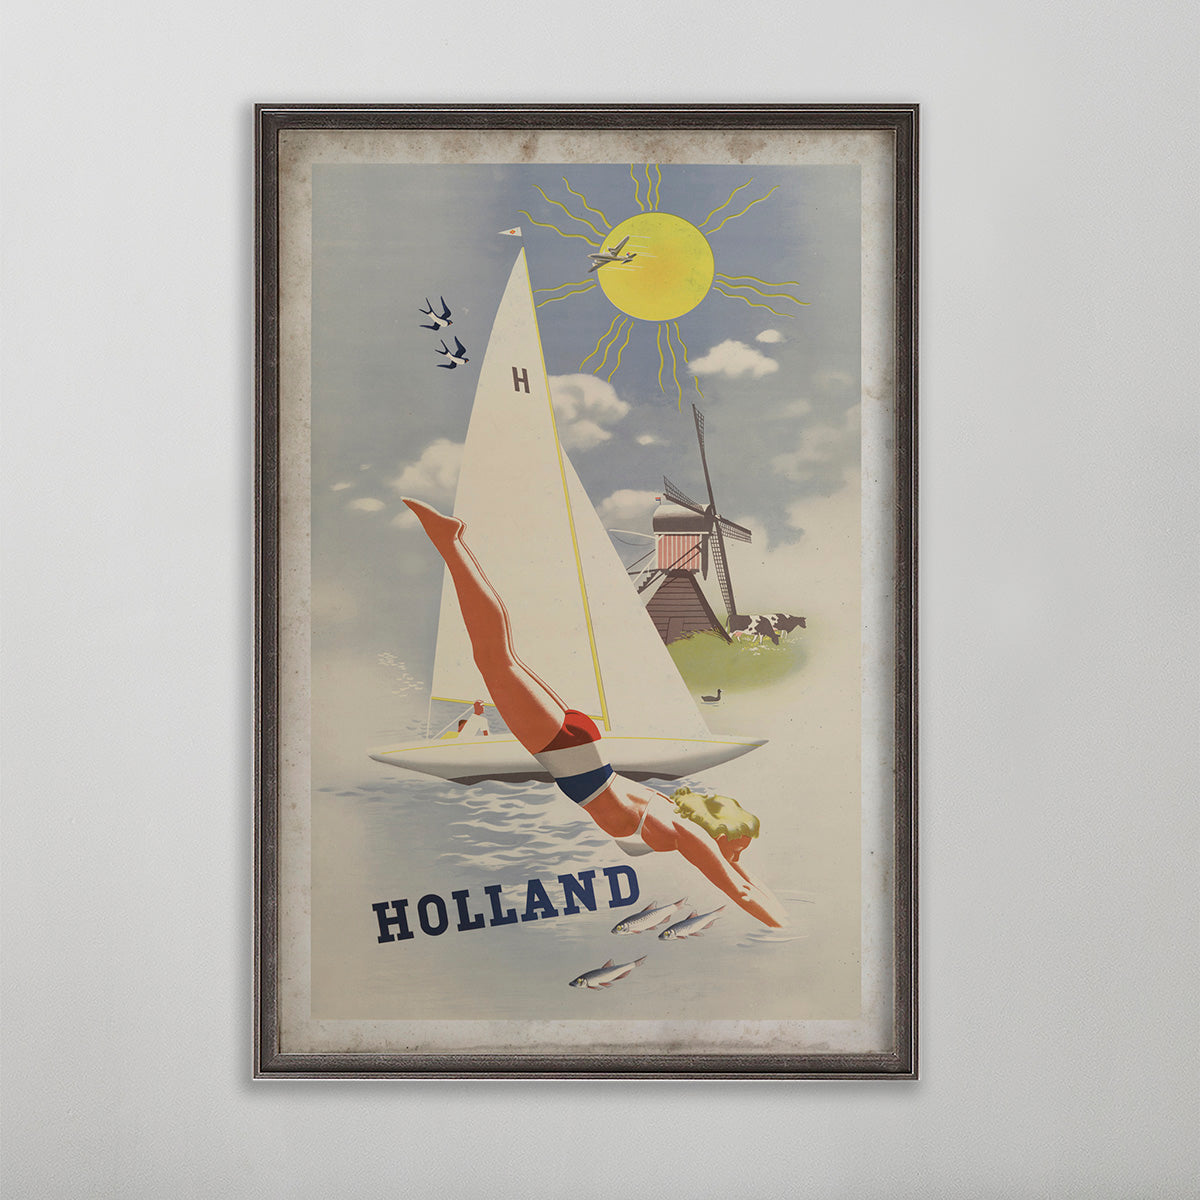 Holland vintage travel poster. Woman diving into lake with sailboat.